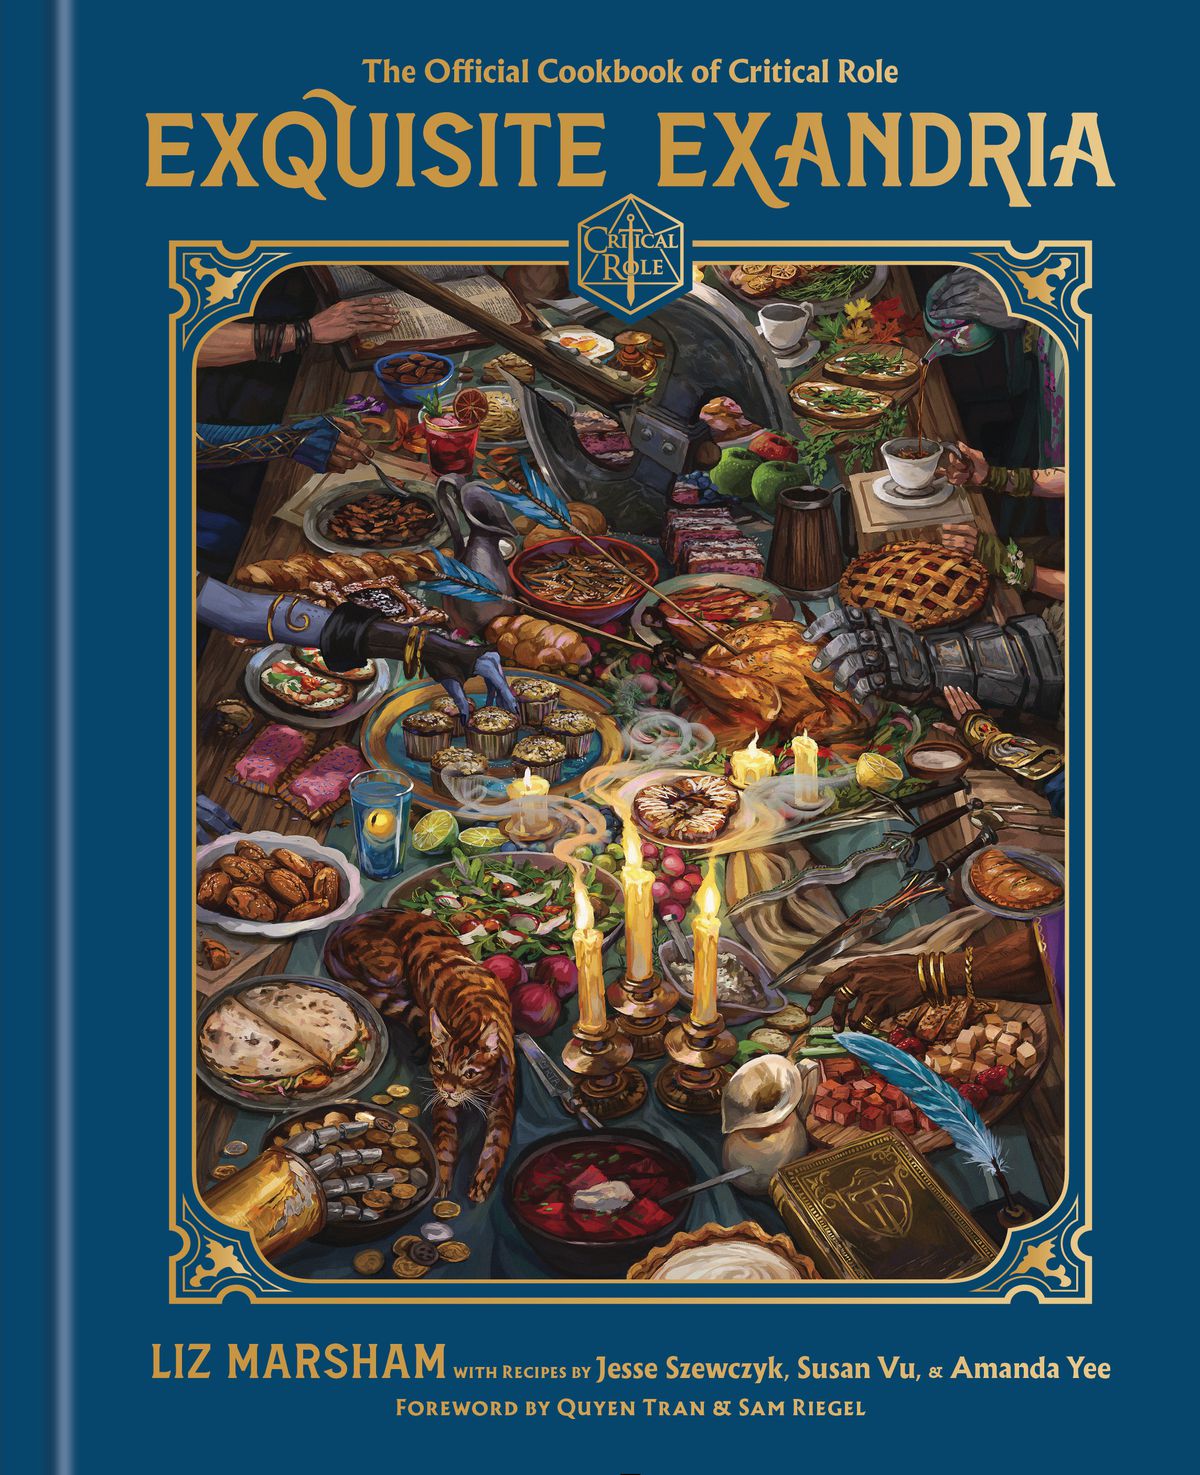 The cover of Exquisite Exandria shows the closeup of a feast table, covered with pies and meat dishes. Is that a quesadilla? Who let the cat in here!? No gauntlets at the table!